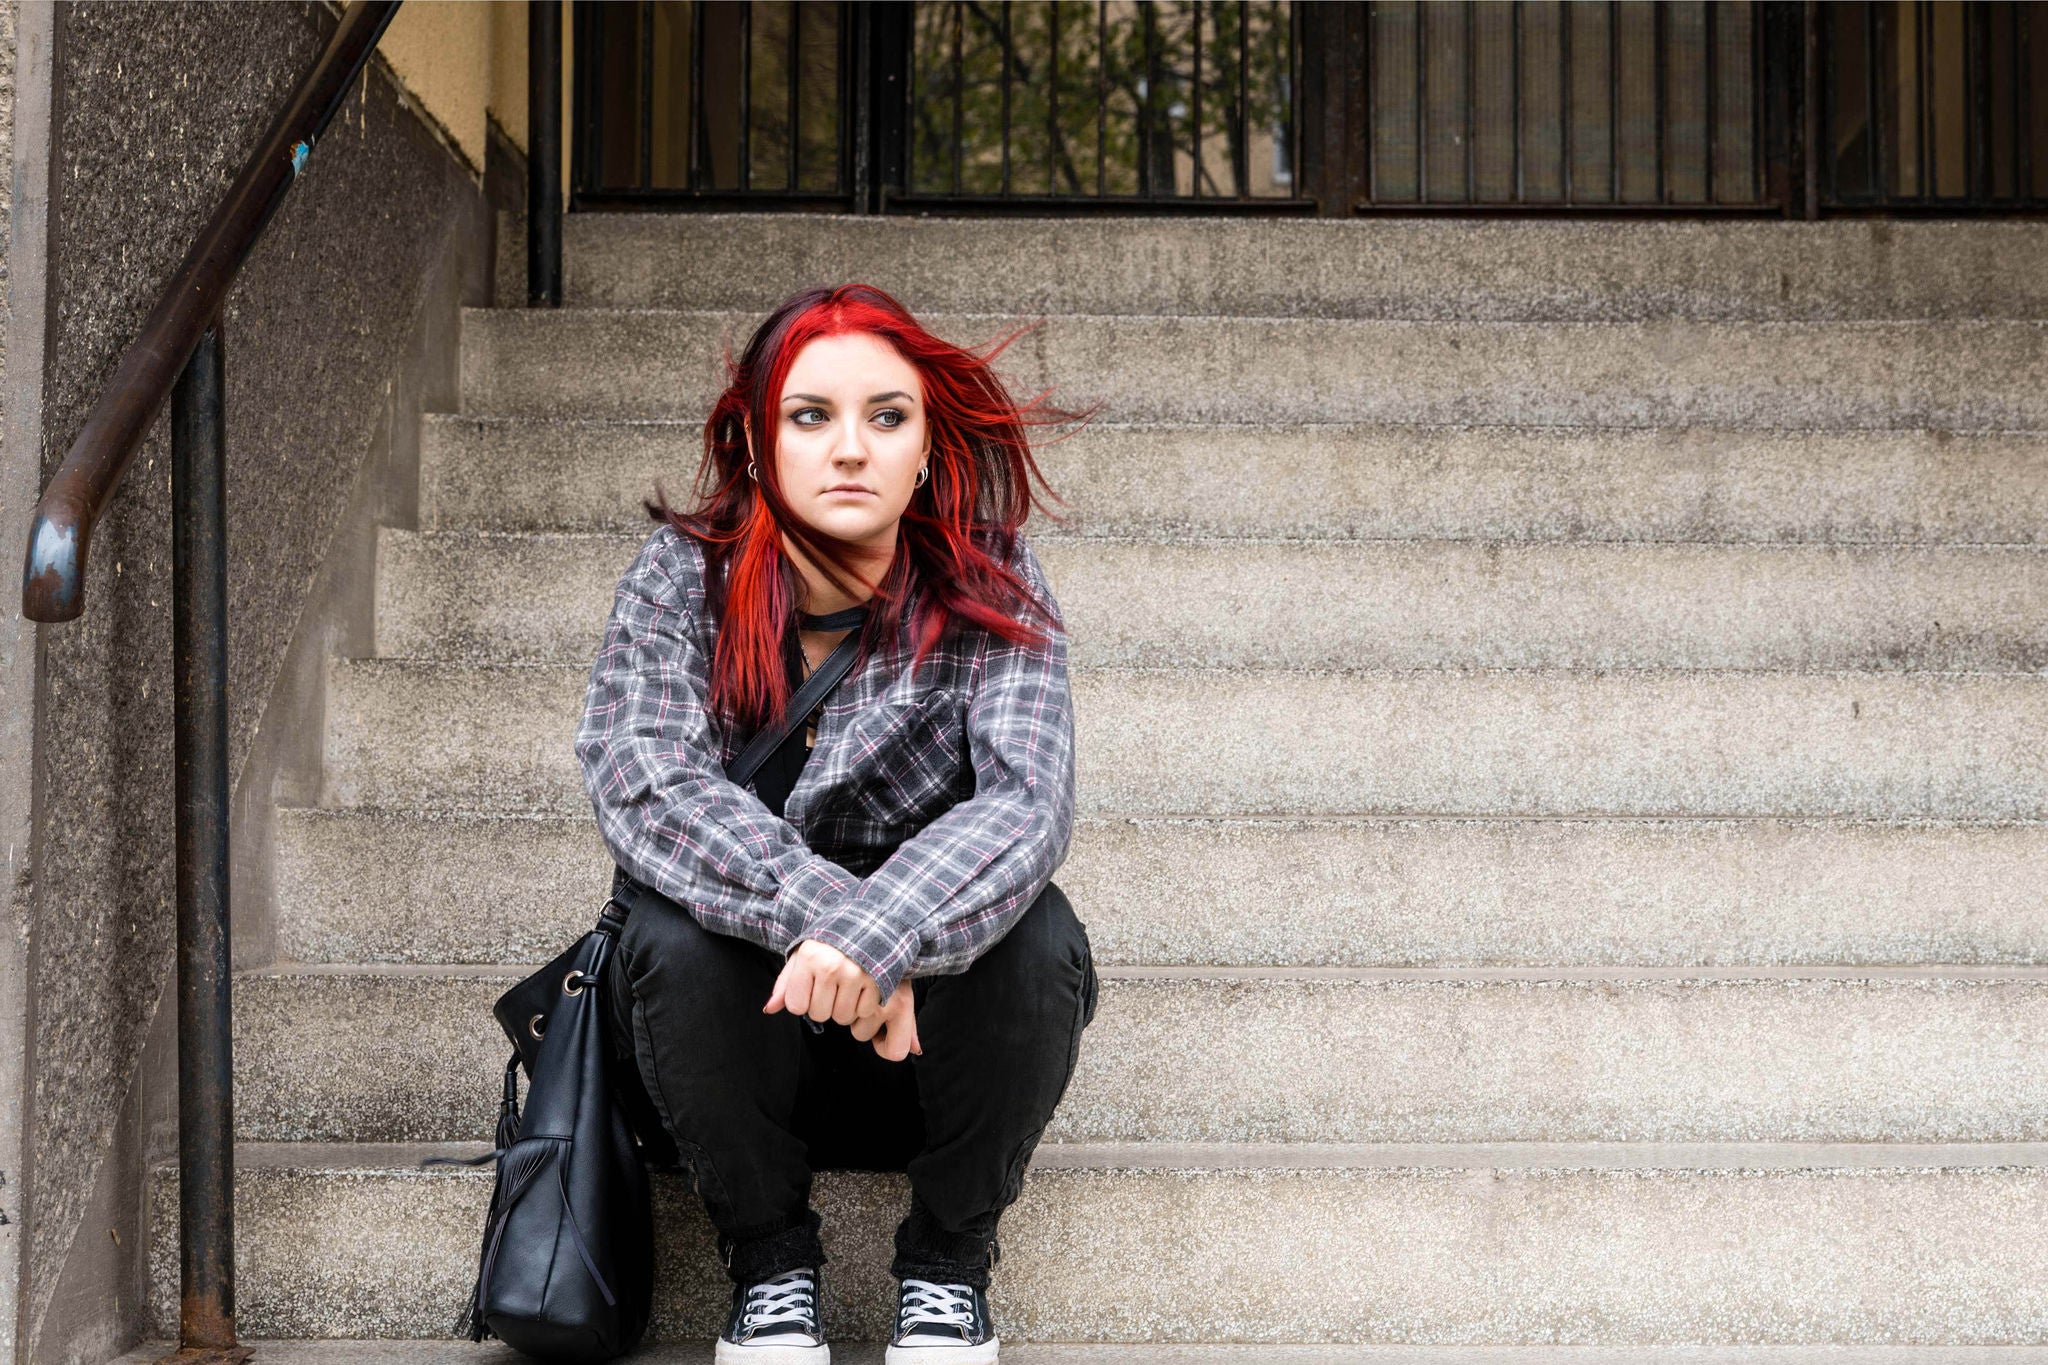 Homeless girl, Young beautiful red hair girl sitting alone outdoors on the stairs of the building with hat and shirt feeling anxious and depressed after she became a homeless person